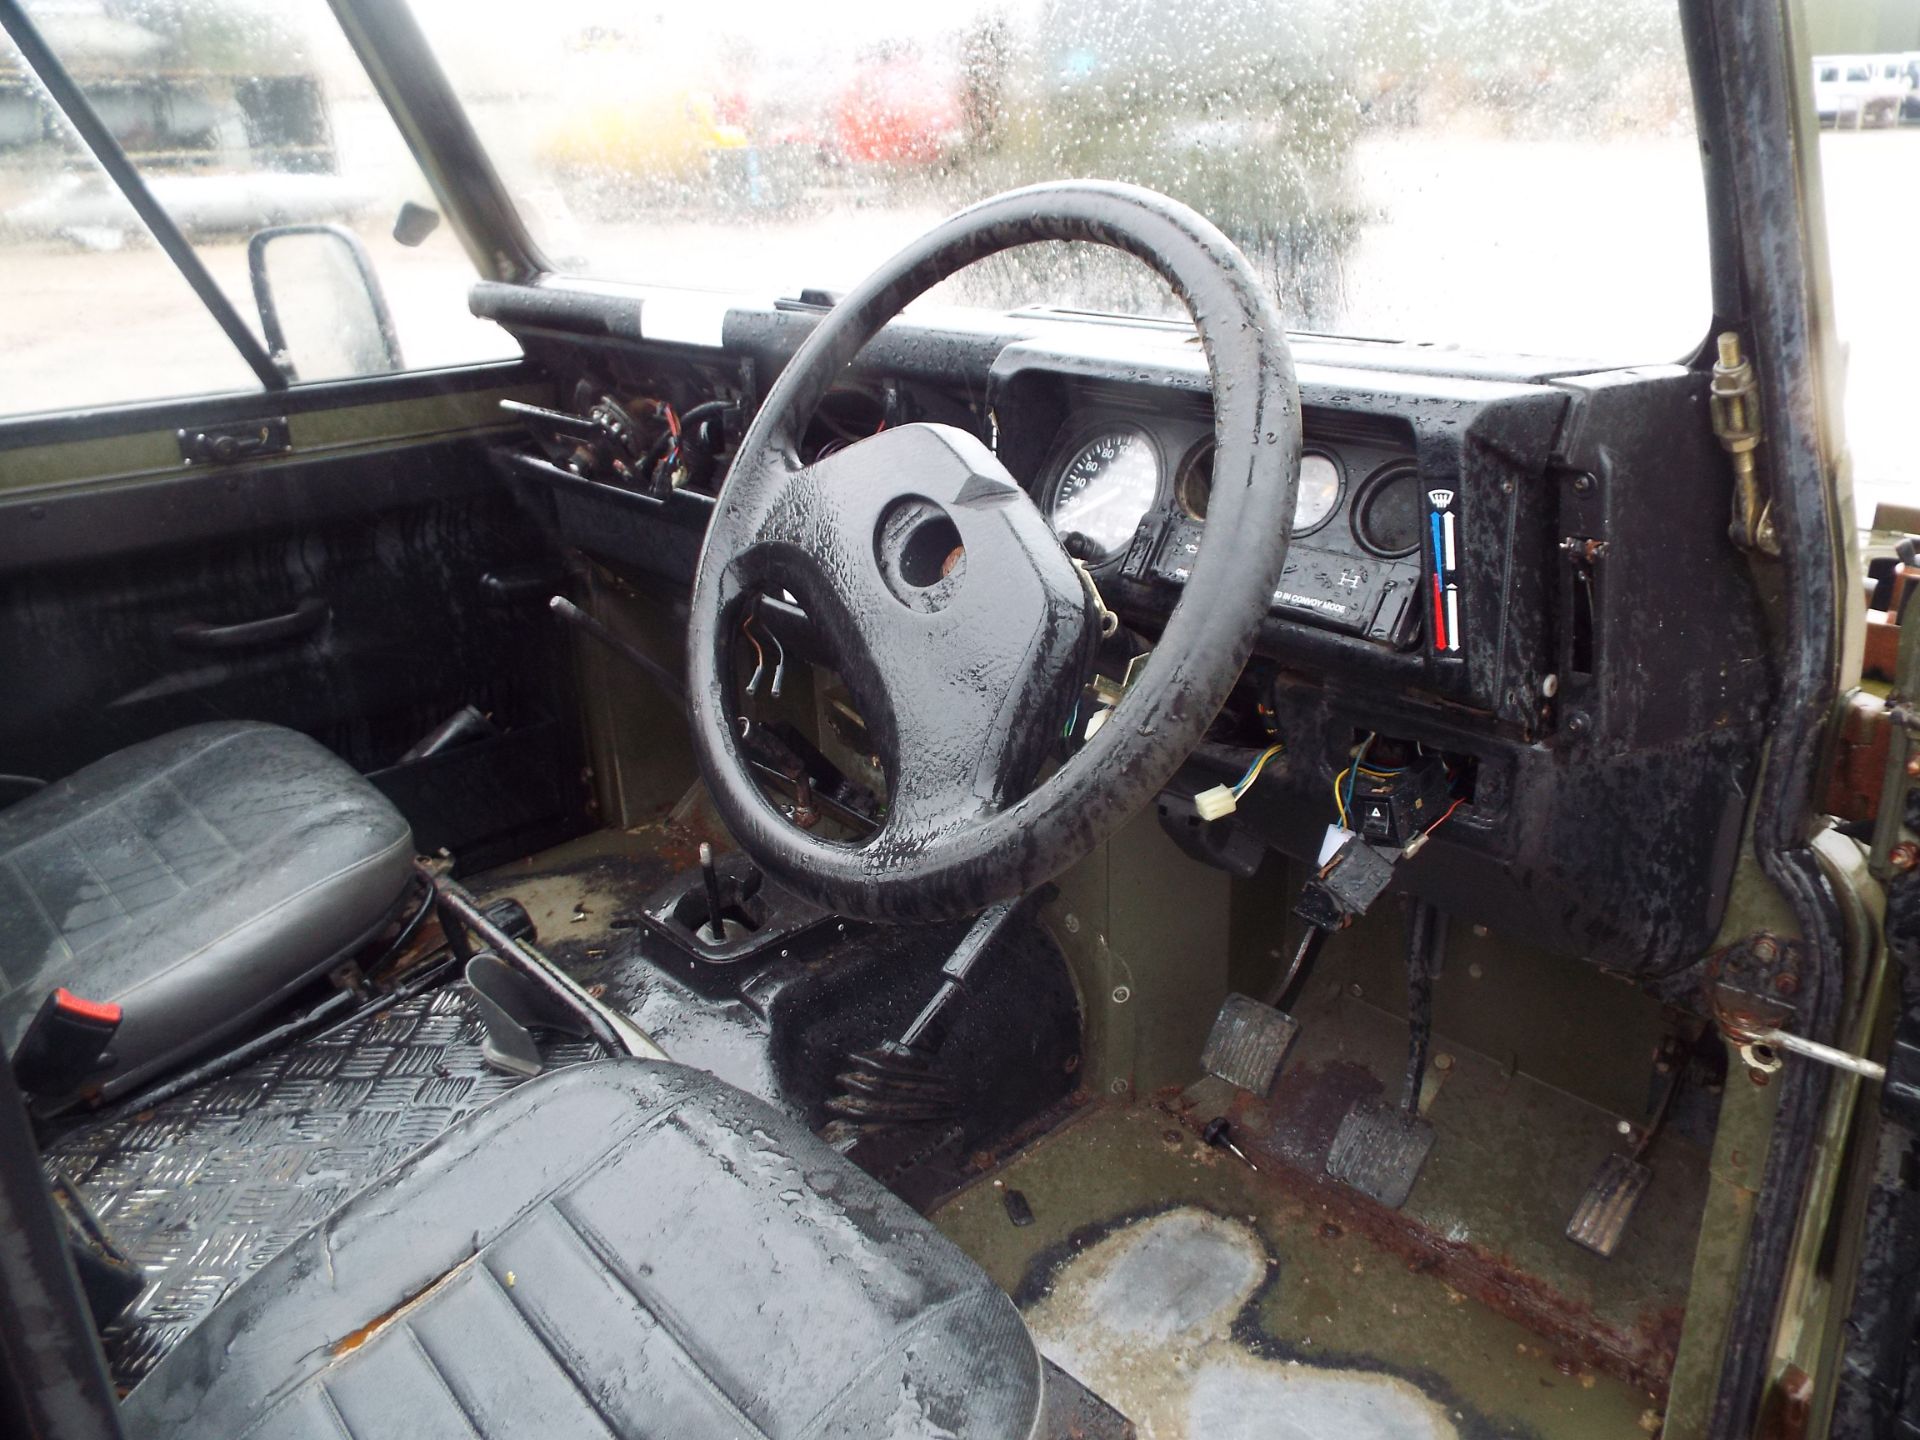 Military Specification Land Rover Wolf 90 Soft Top - Image 14 of 24